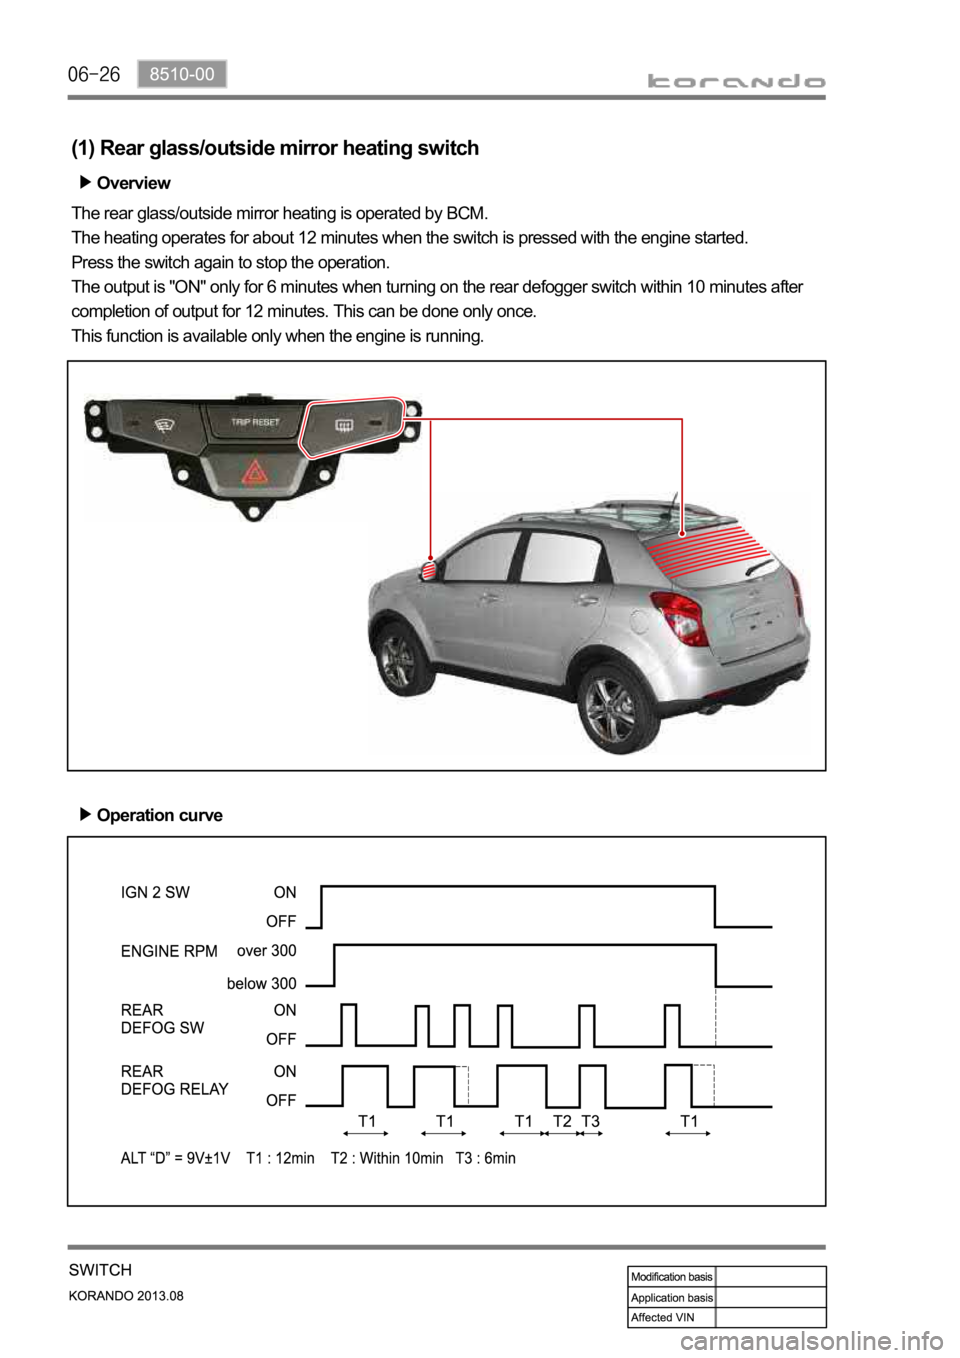 SSANGYONG KORANDO 2013  Service Manual (1) Rear glass/outside mirror heating switch
Overview
The rear glass/outside mirror heating is operated by BCM.
The heating operates for about 12 minutes when the switch is pressed with the engine sta